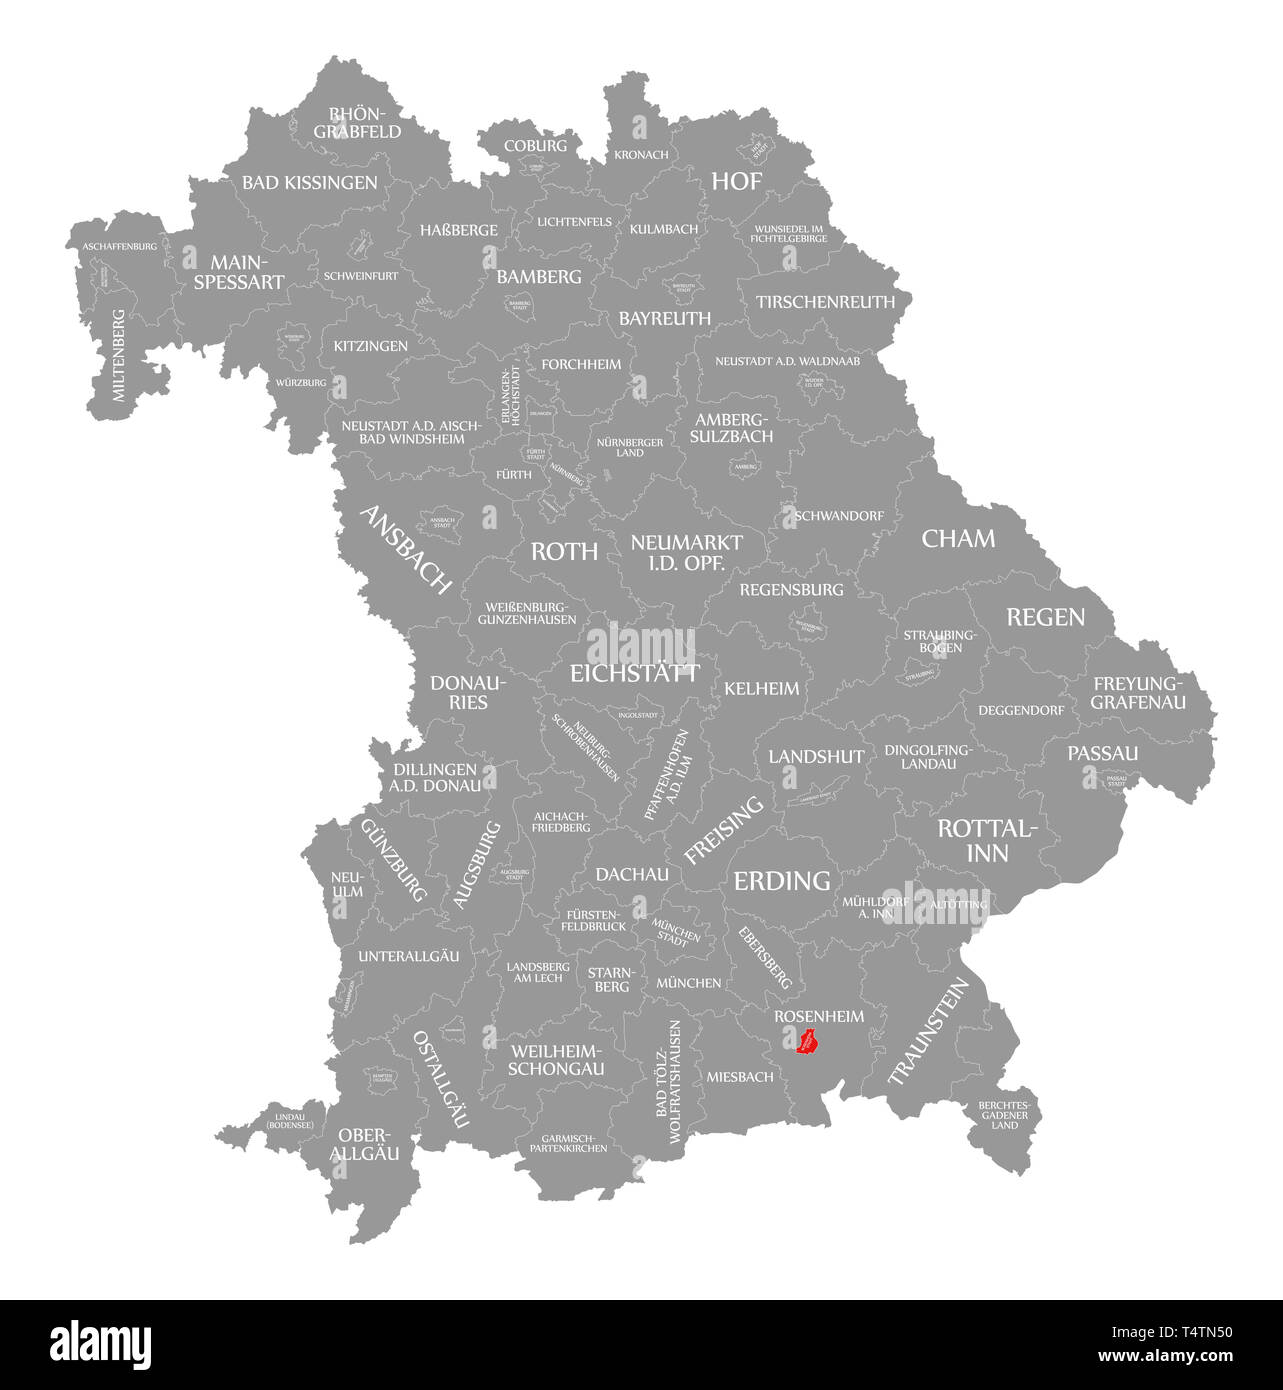 Rosenheim city red highlighted in map of Bavaria Germany Stock Photo